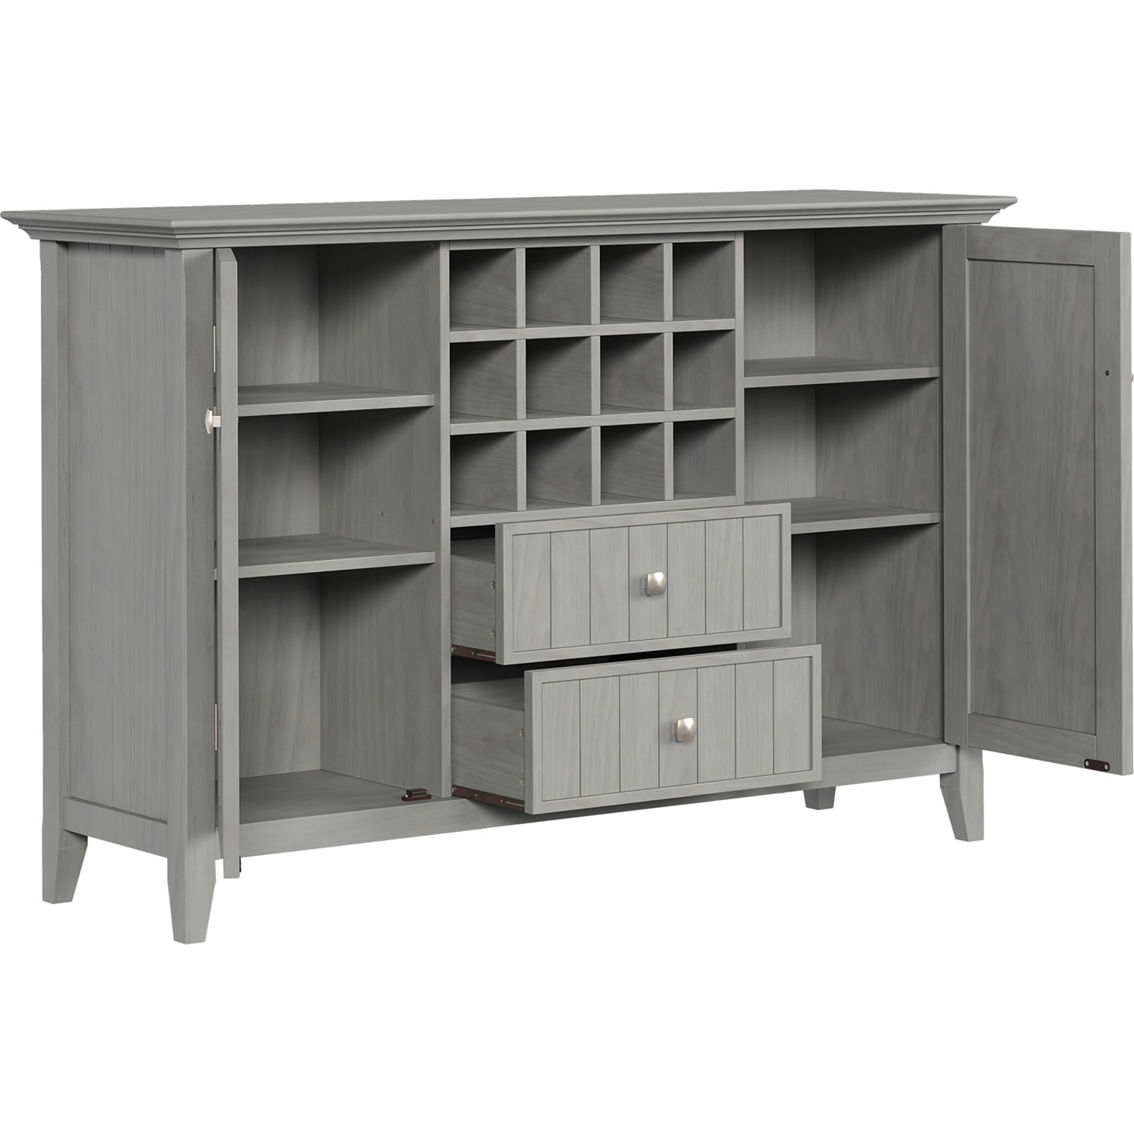 Simpli Home Bedford Sideboard Buffet and Wine Rack - Image 2 of 3